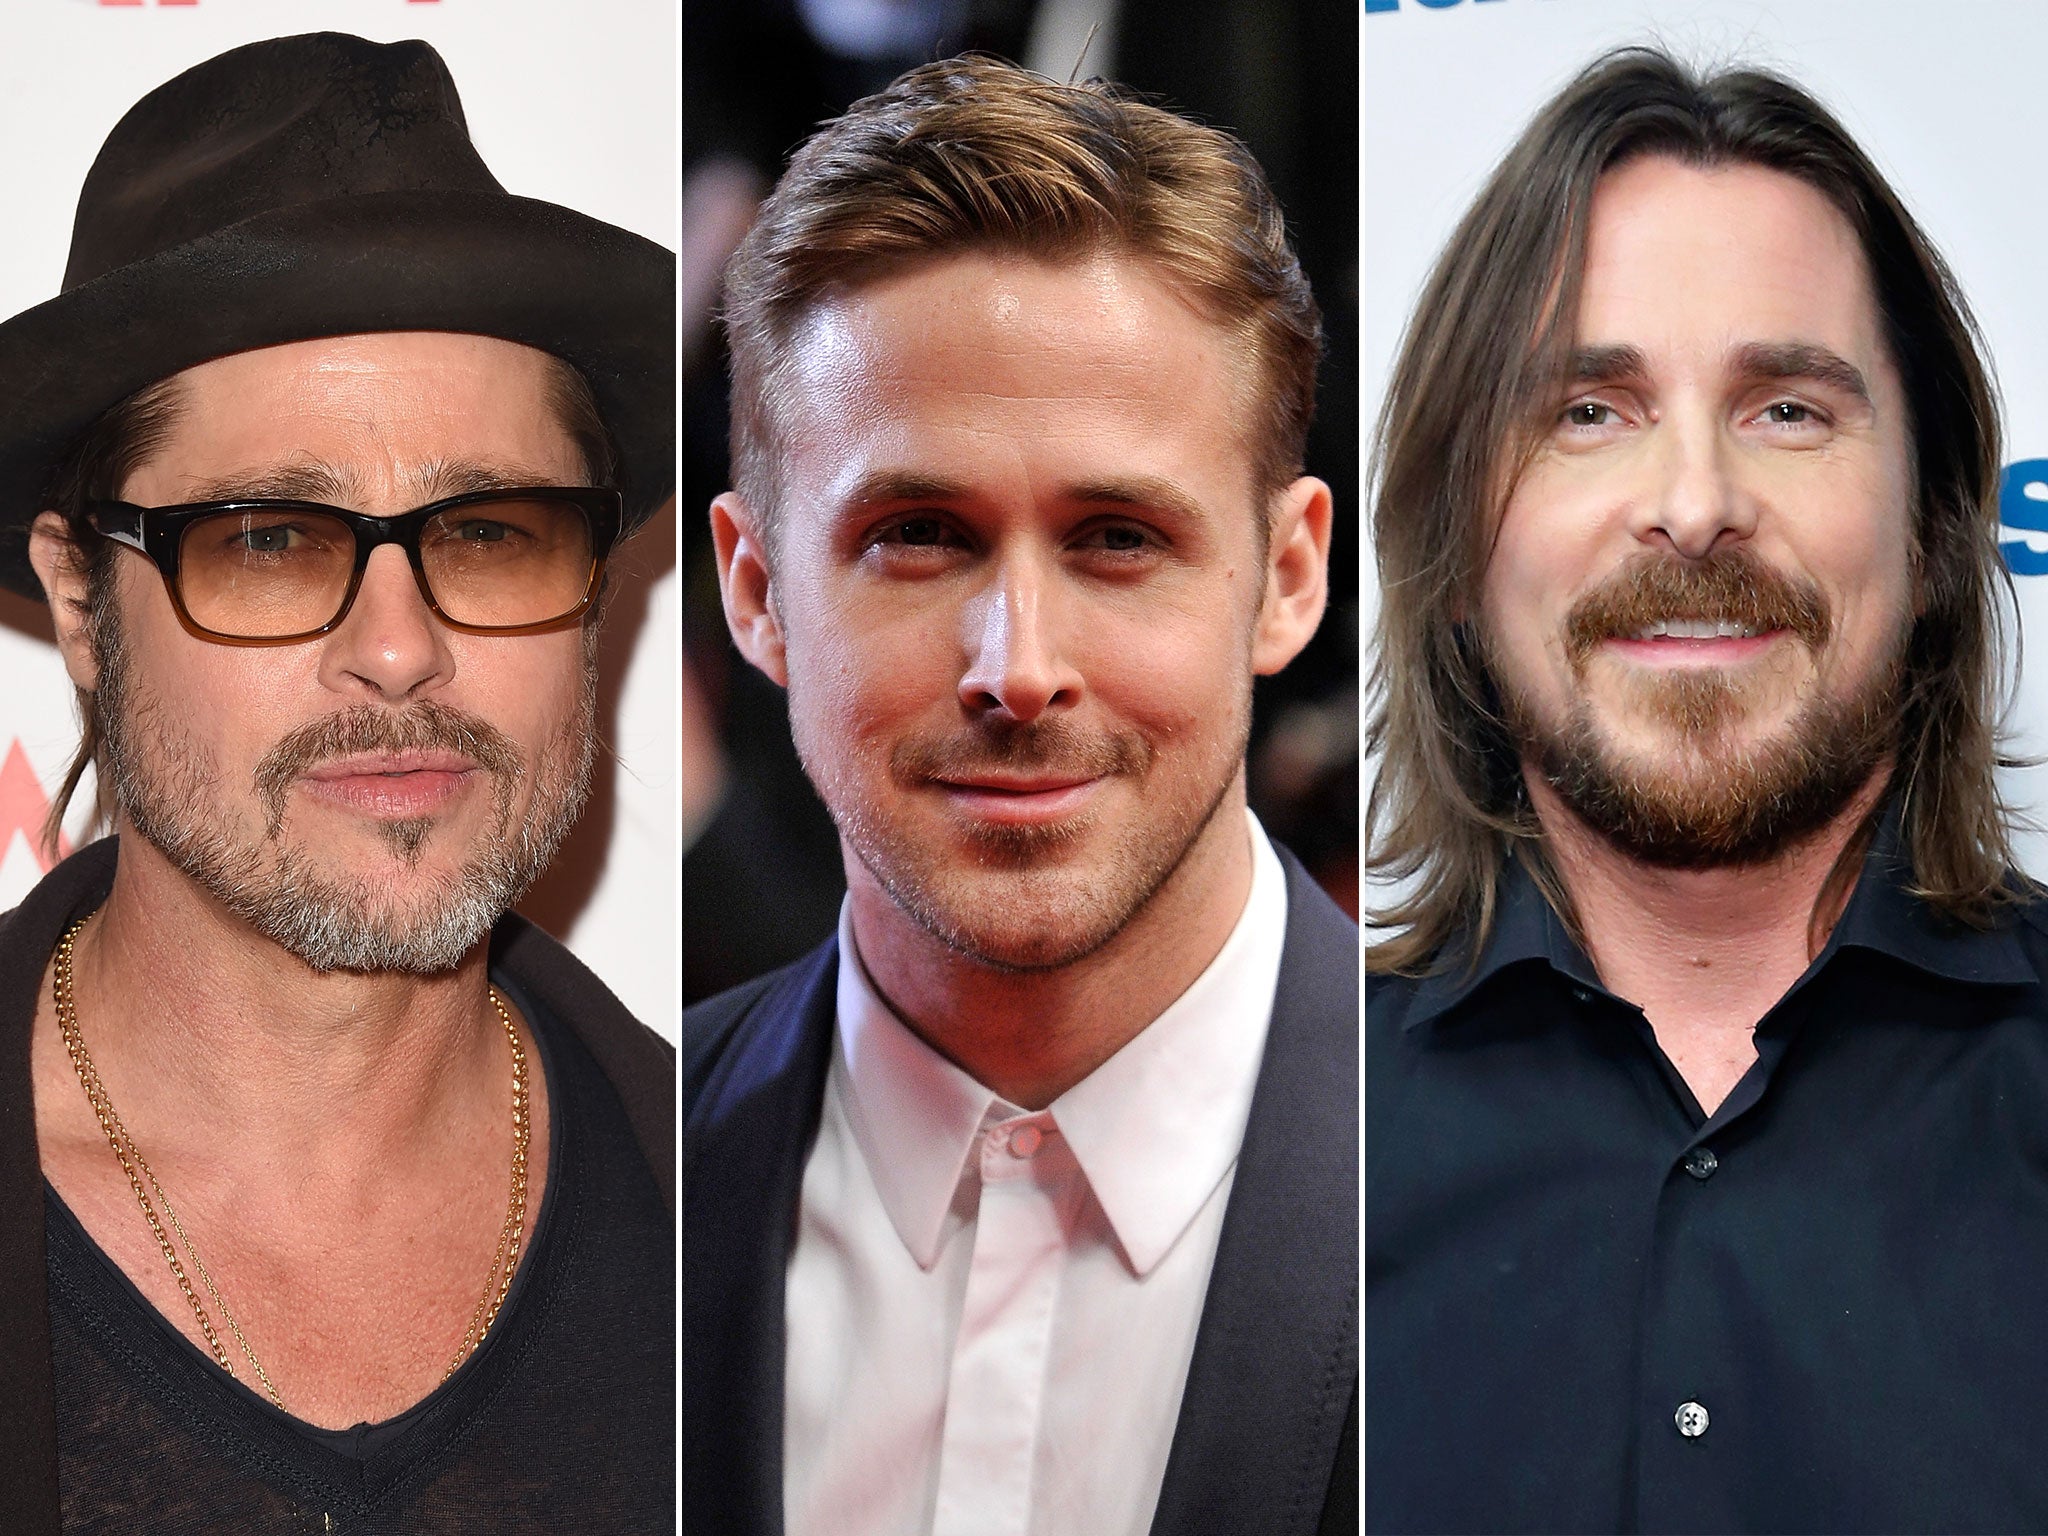 Brad Pitt, Ryan Gosling and Christian Bale are in talks to star in The Big Short